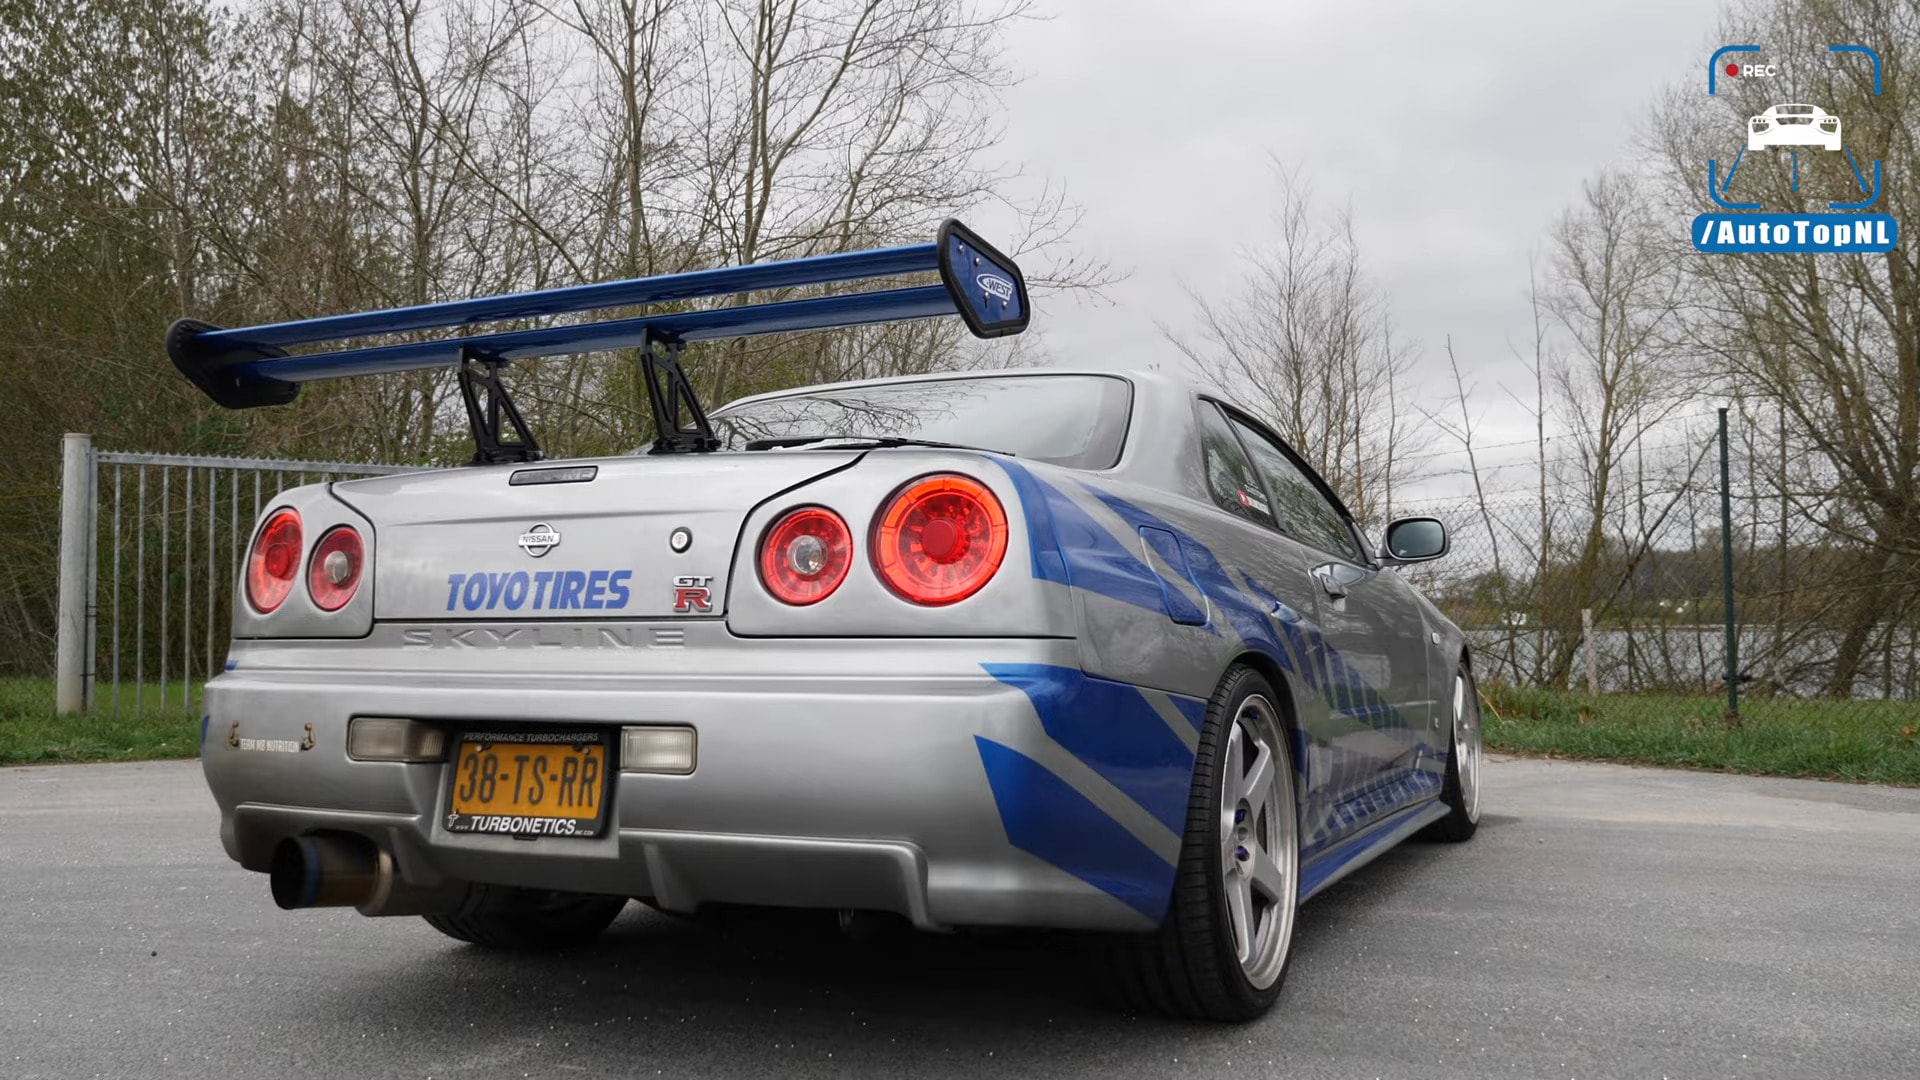 "Brian O'Conner's" 450-HP Nissan R34 Skyline GT-R Visits Europe, Gets